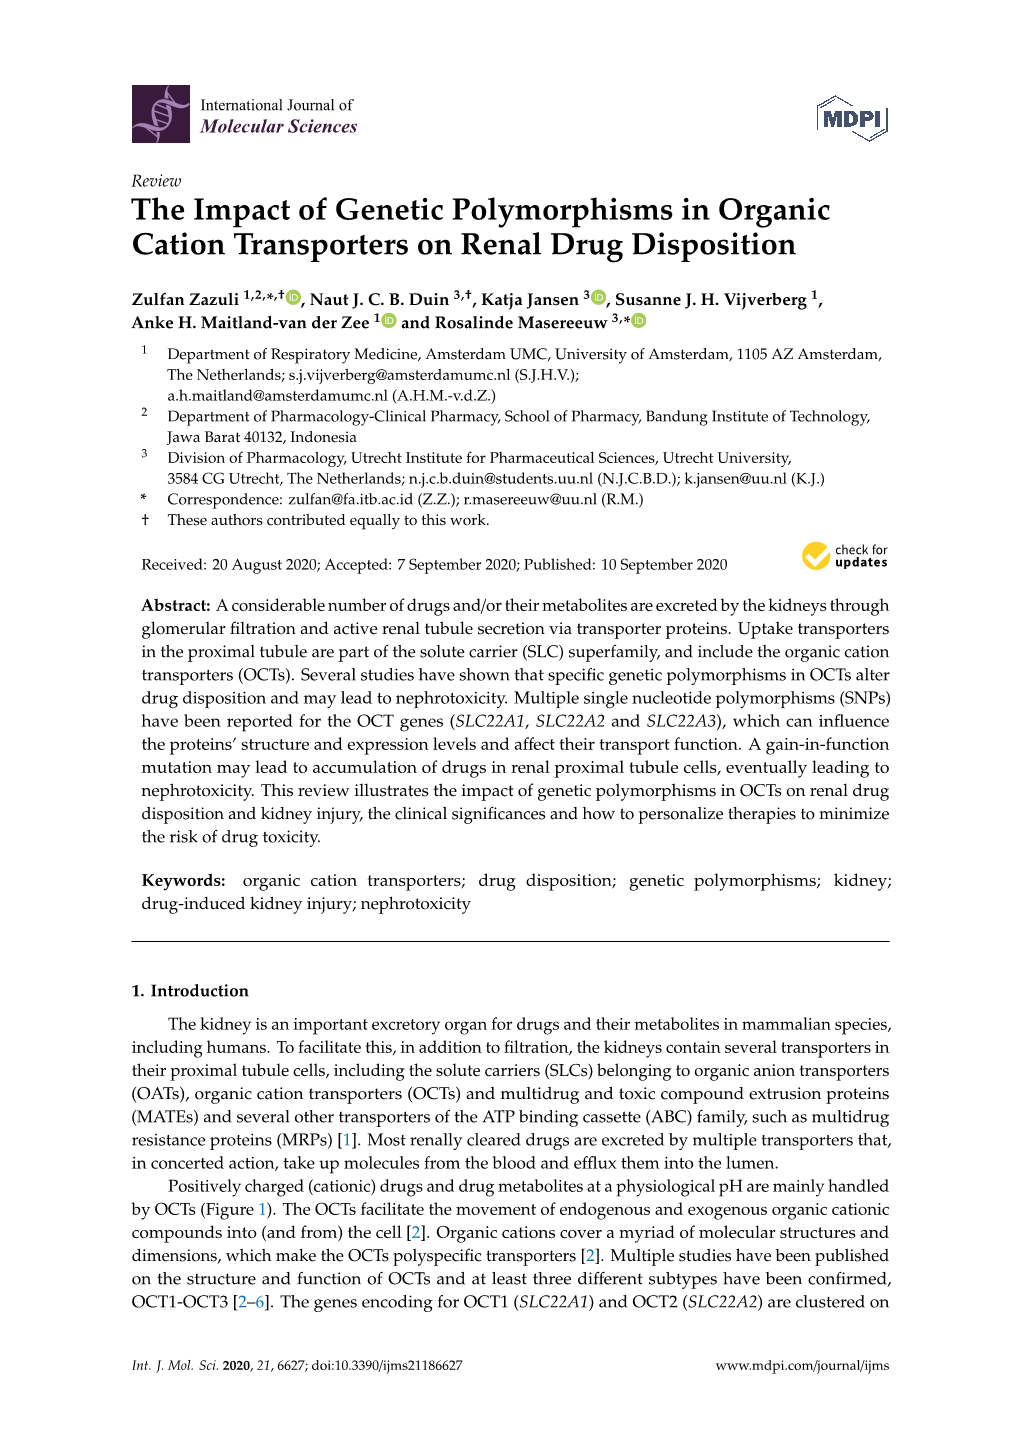 The Impact of Genetic Polymorphisms in Organic Cation Transporters on Renal Drug Disposition